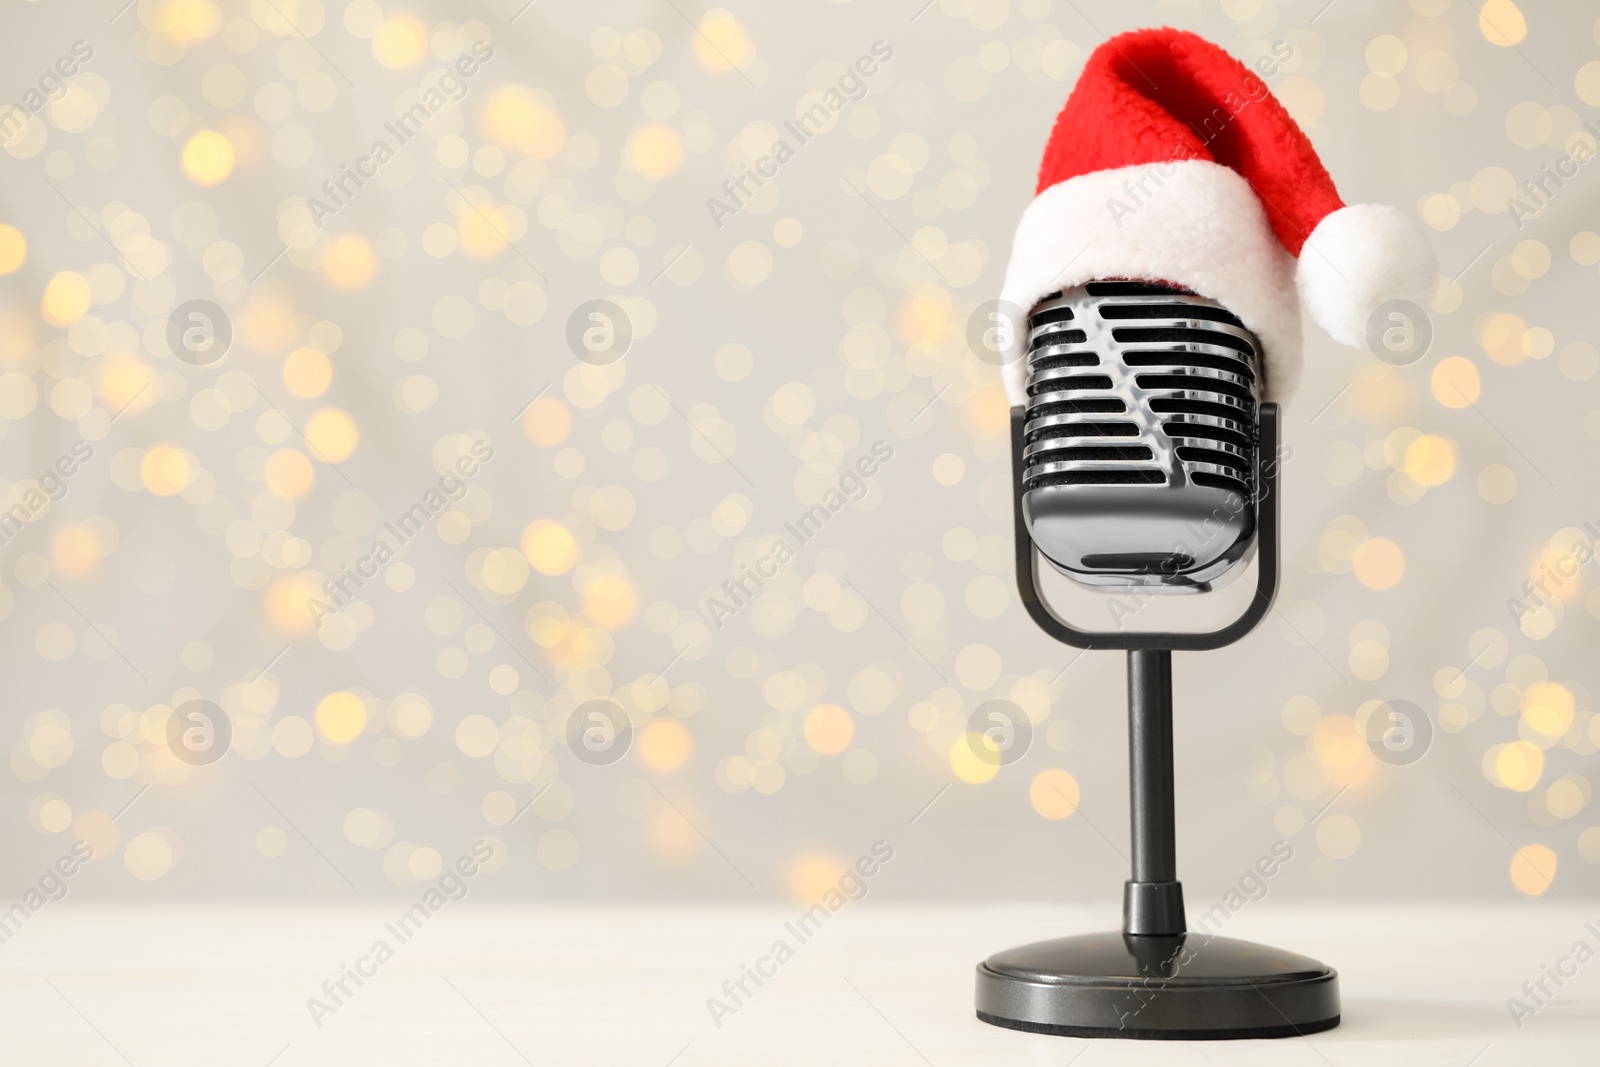 Photo of Retro microphone with Santa hat on table against blurred lights, space for text. Christmas music